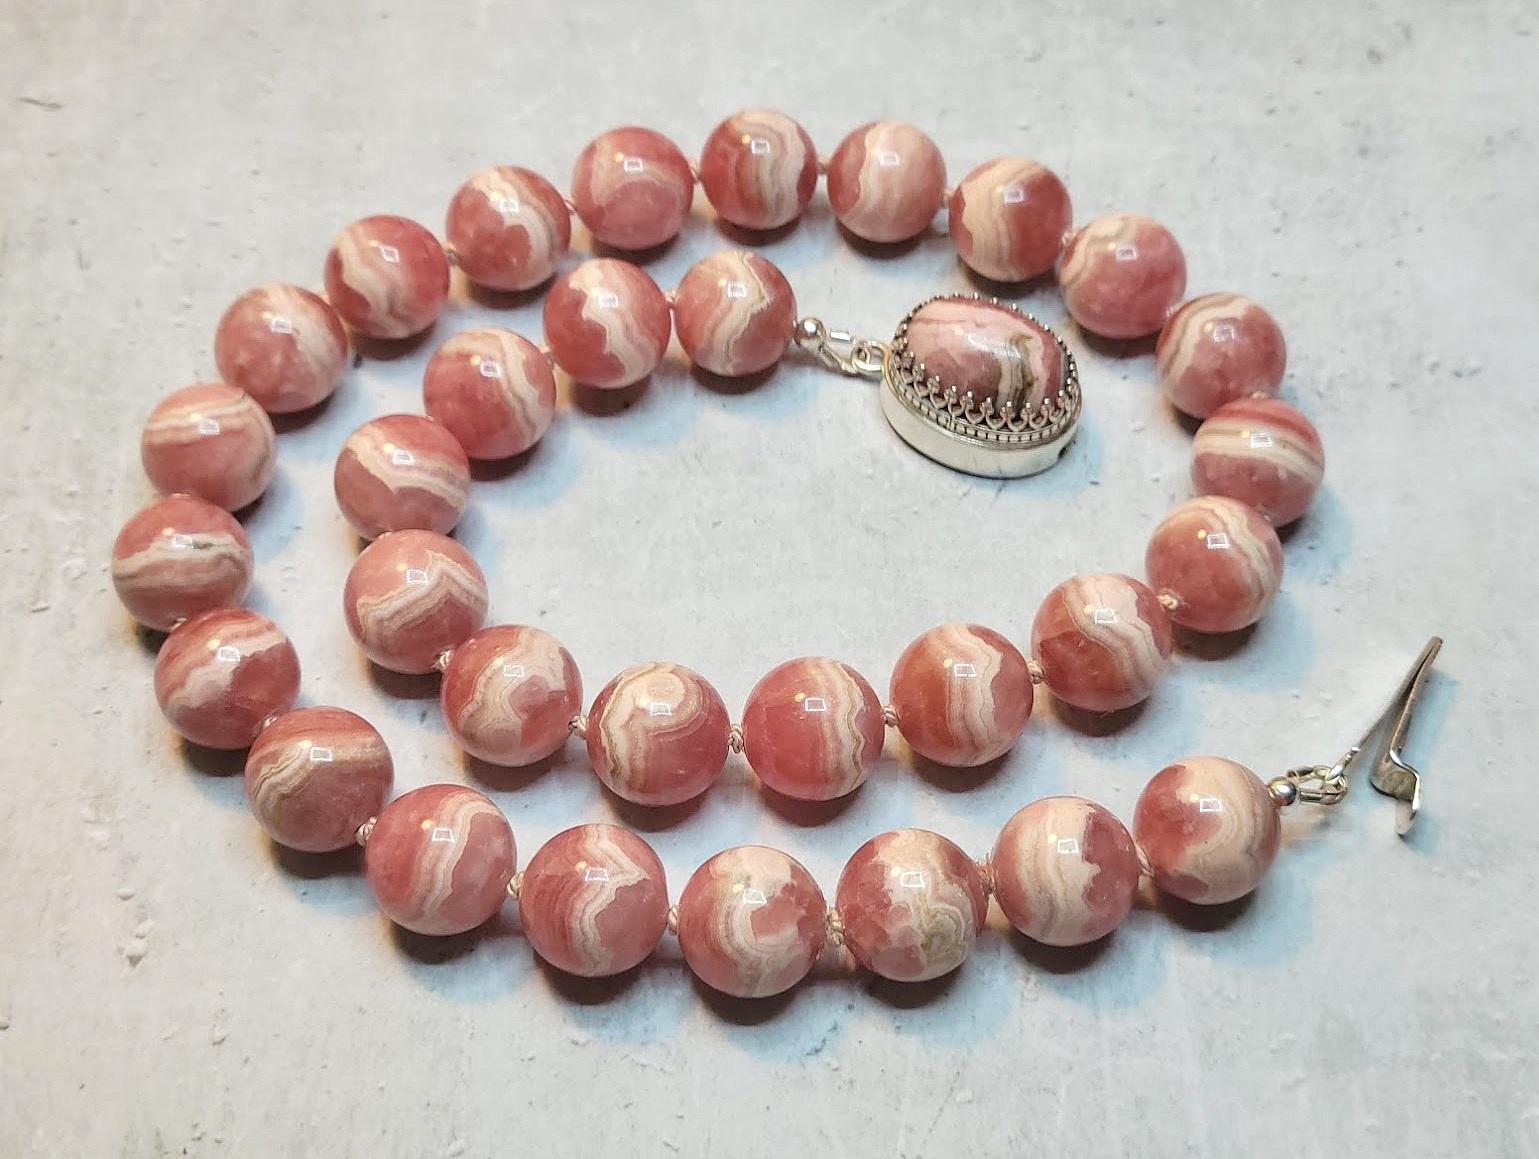 The length of the necklace is 18.5 inches (47 cm). The rare size of the smooth round beads is 13.5 mm.
Natural rose-red rhodochrosite. Authentic, natural color not treated in any way. Superior higher grade! The beautiful, interesting light pinky